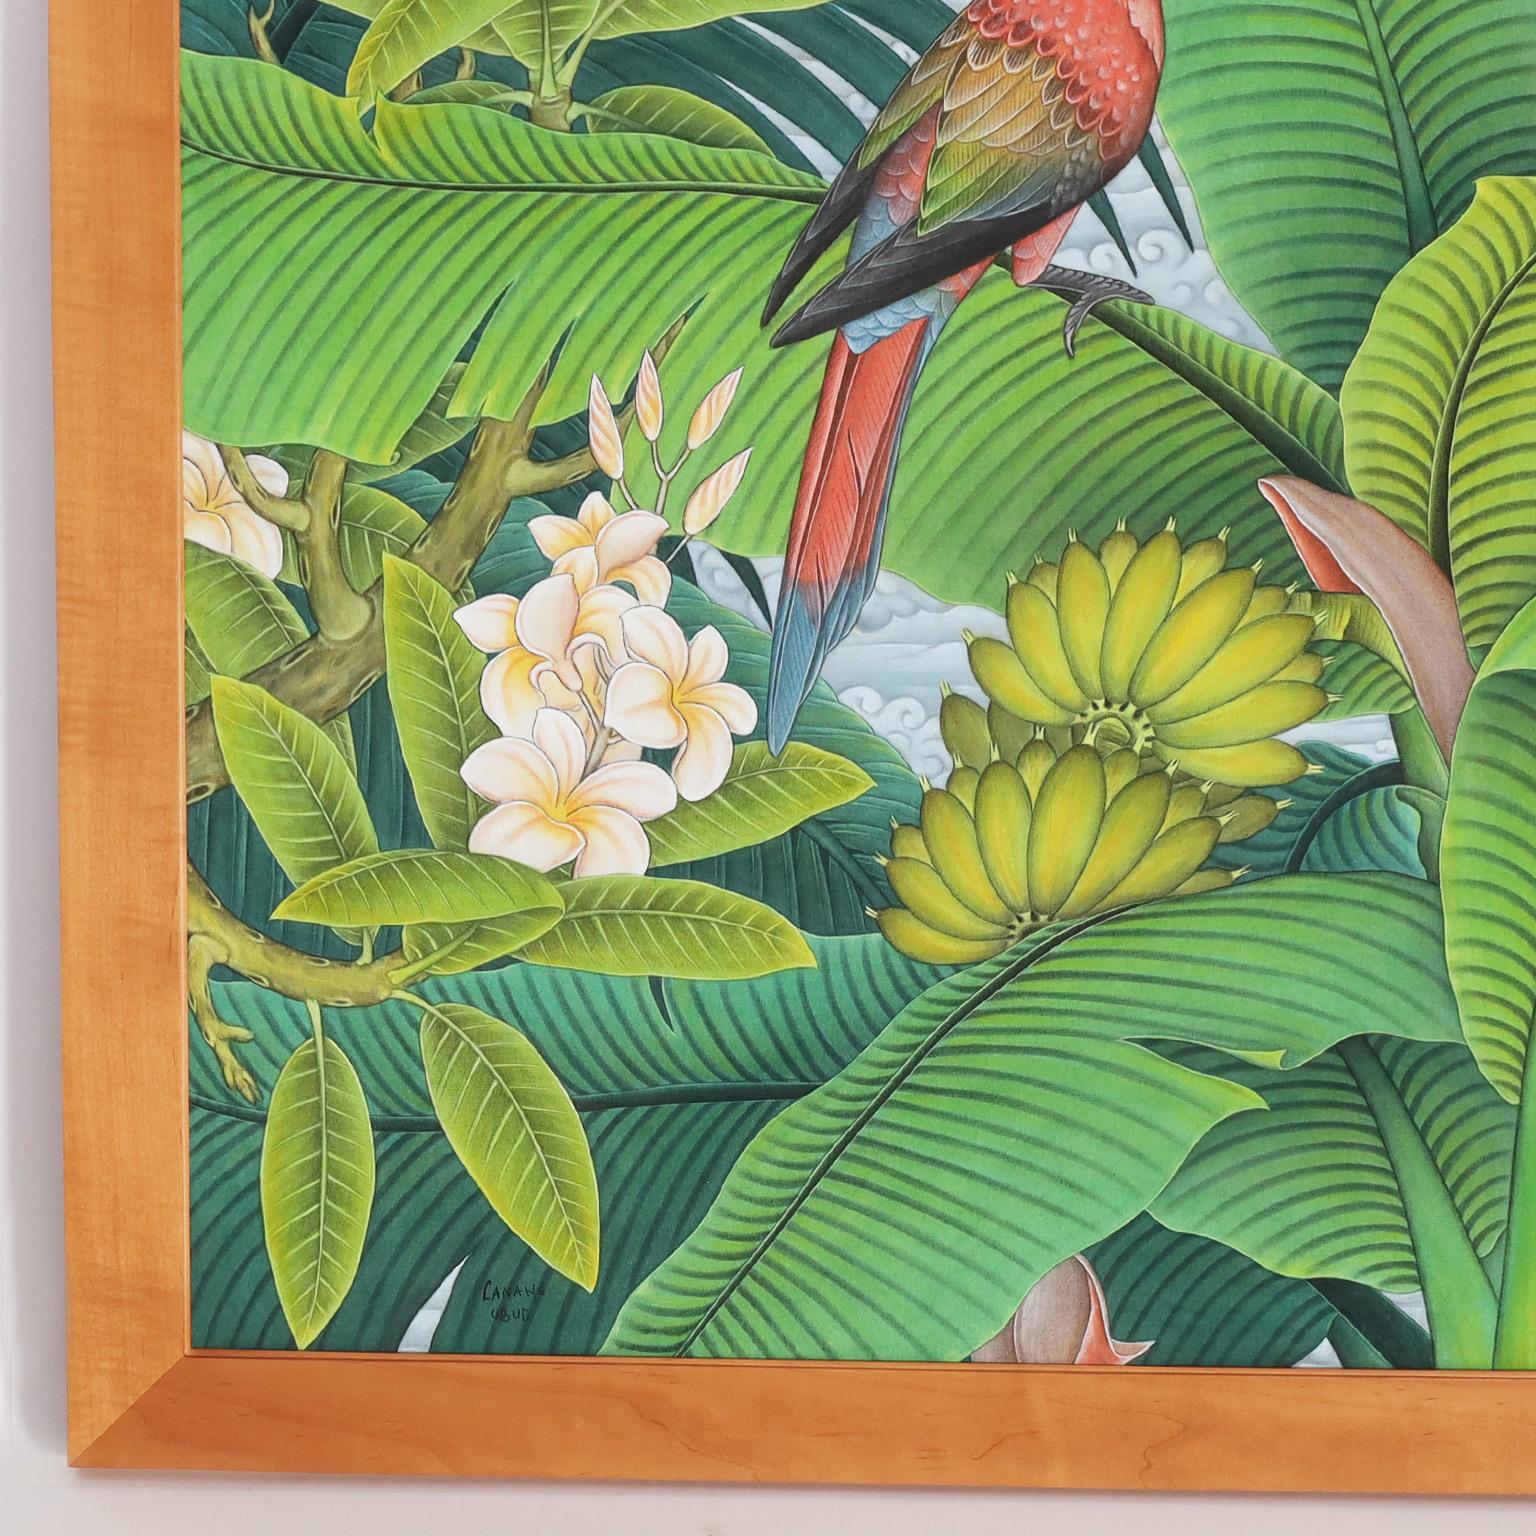 Hand-Painted Painting on Canvas with Parrots and Flowers